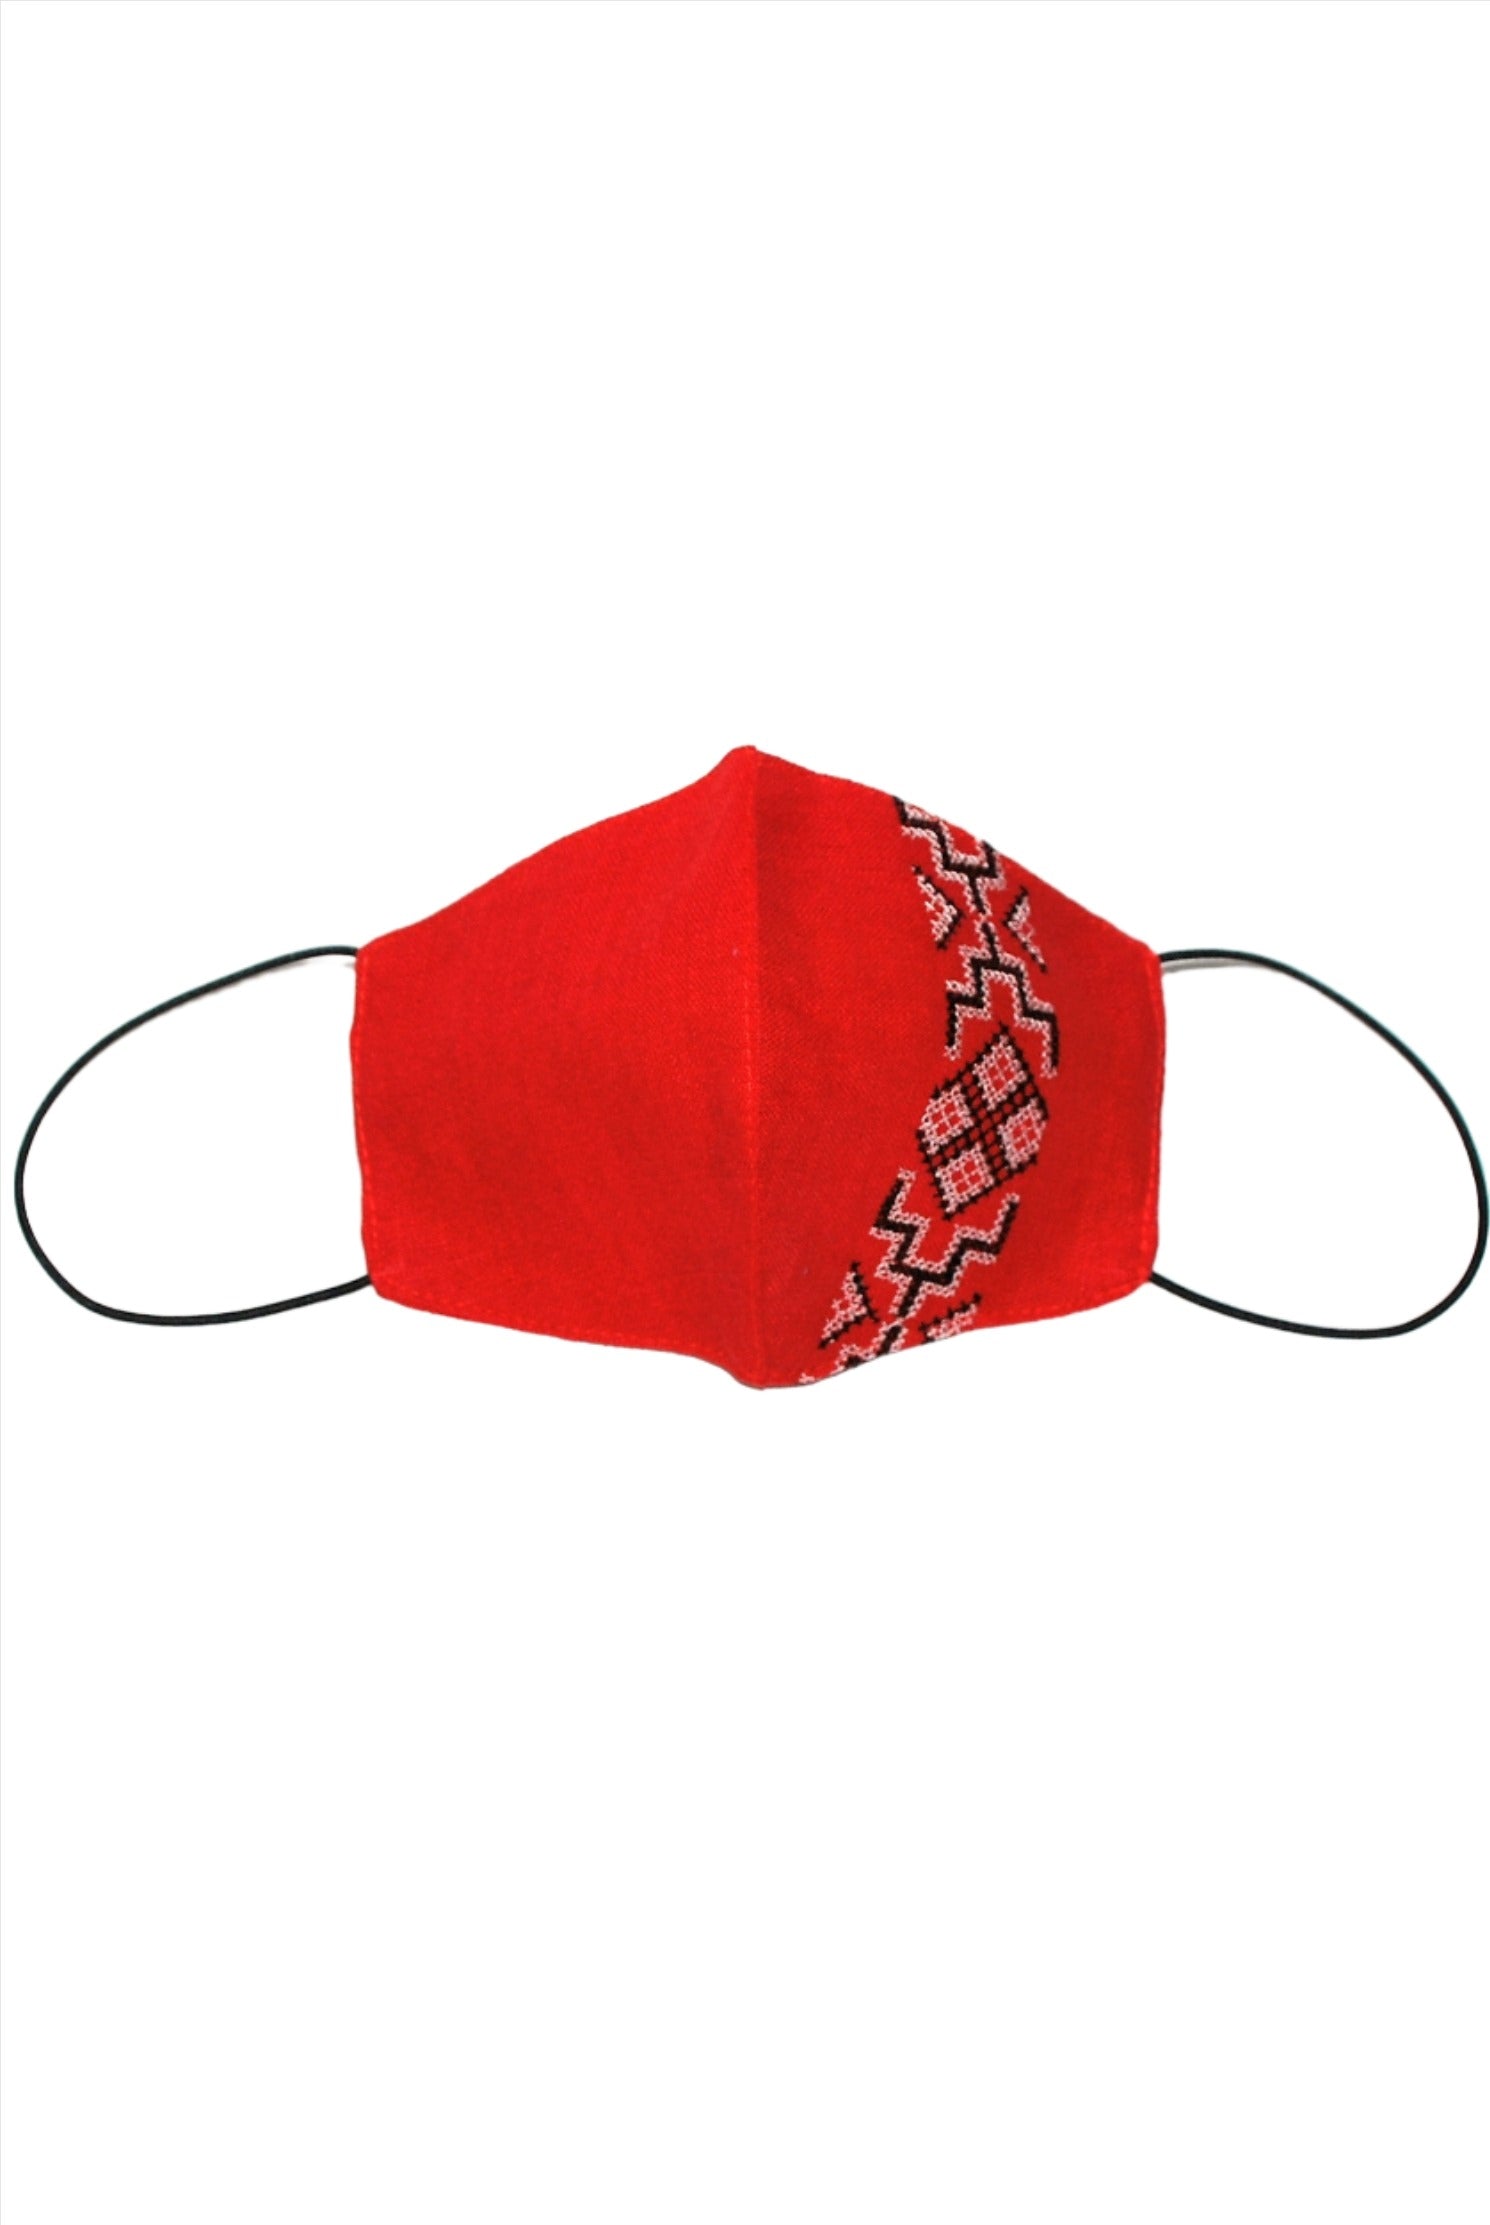 Ukrainian embroidered Face cover. Red